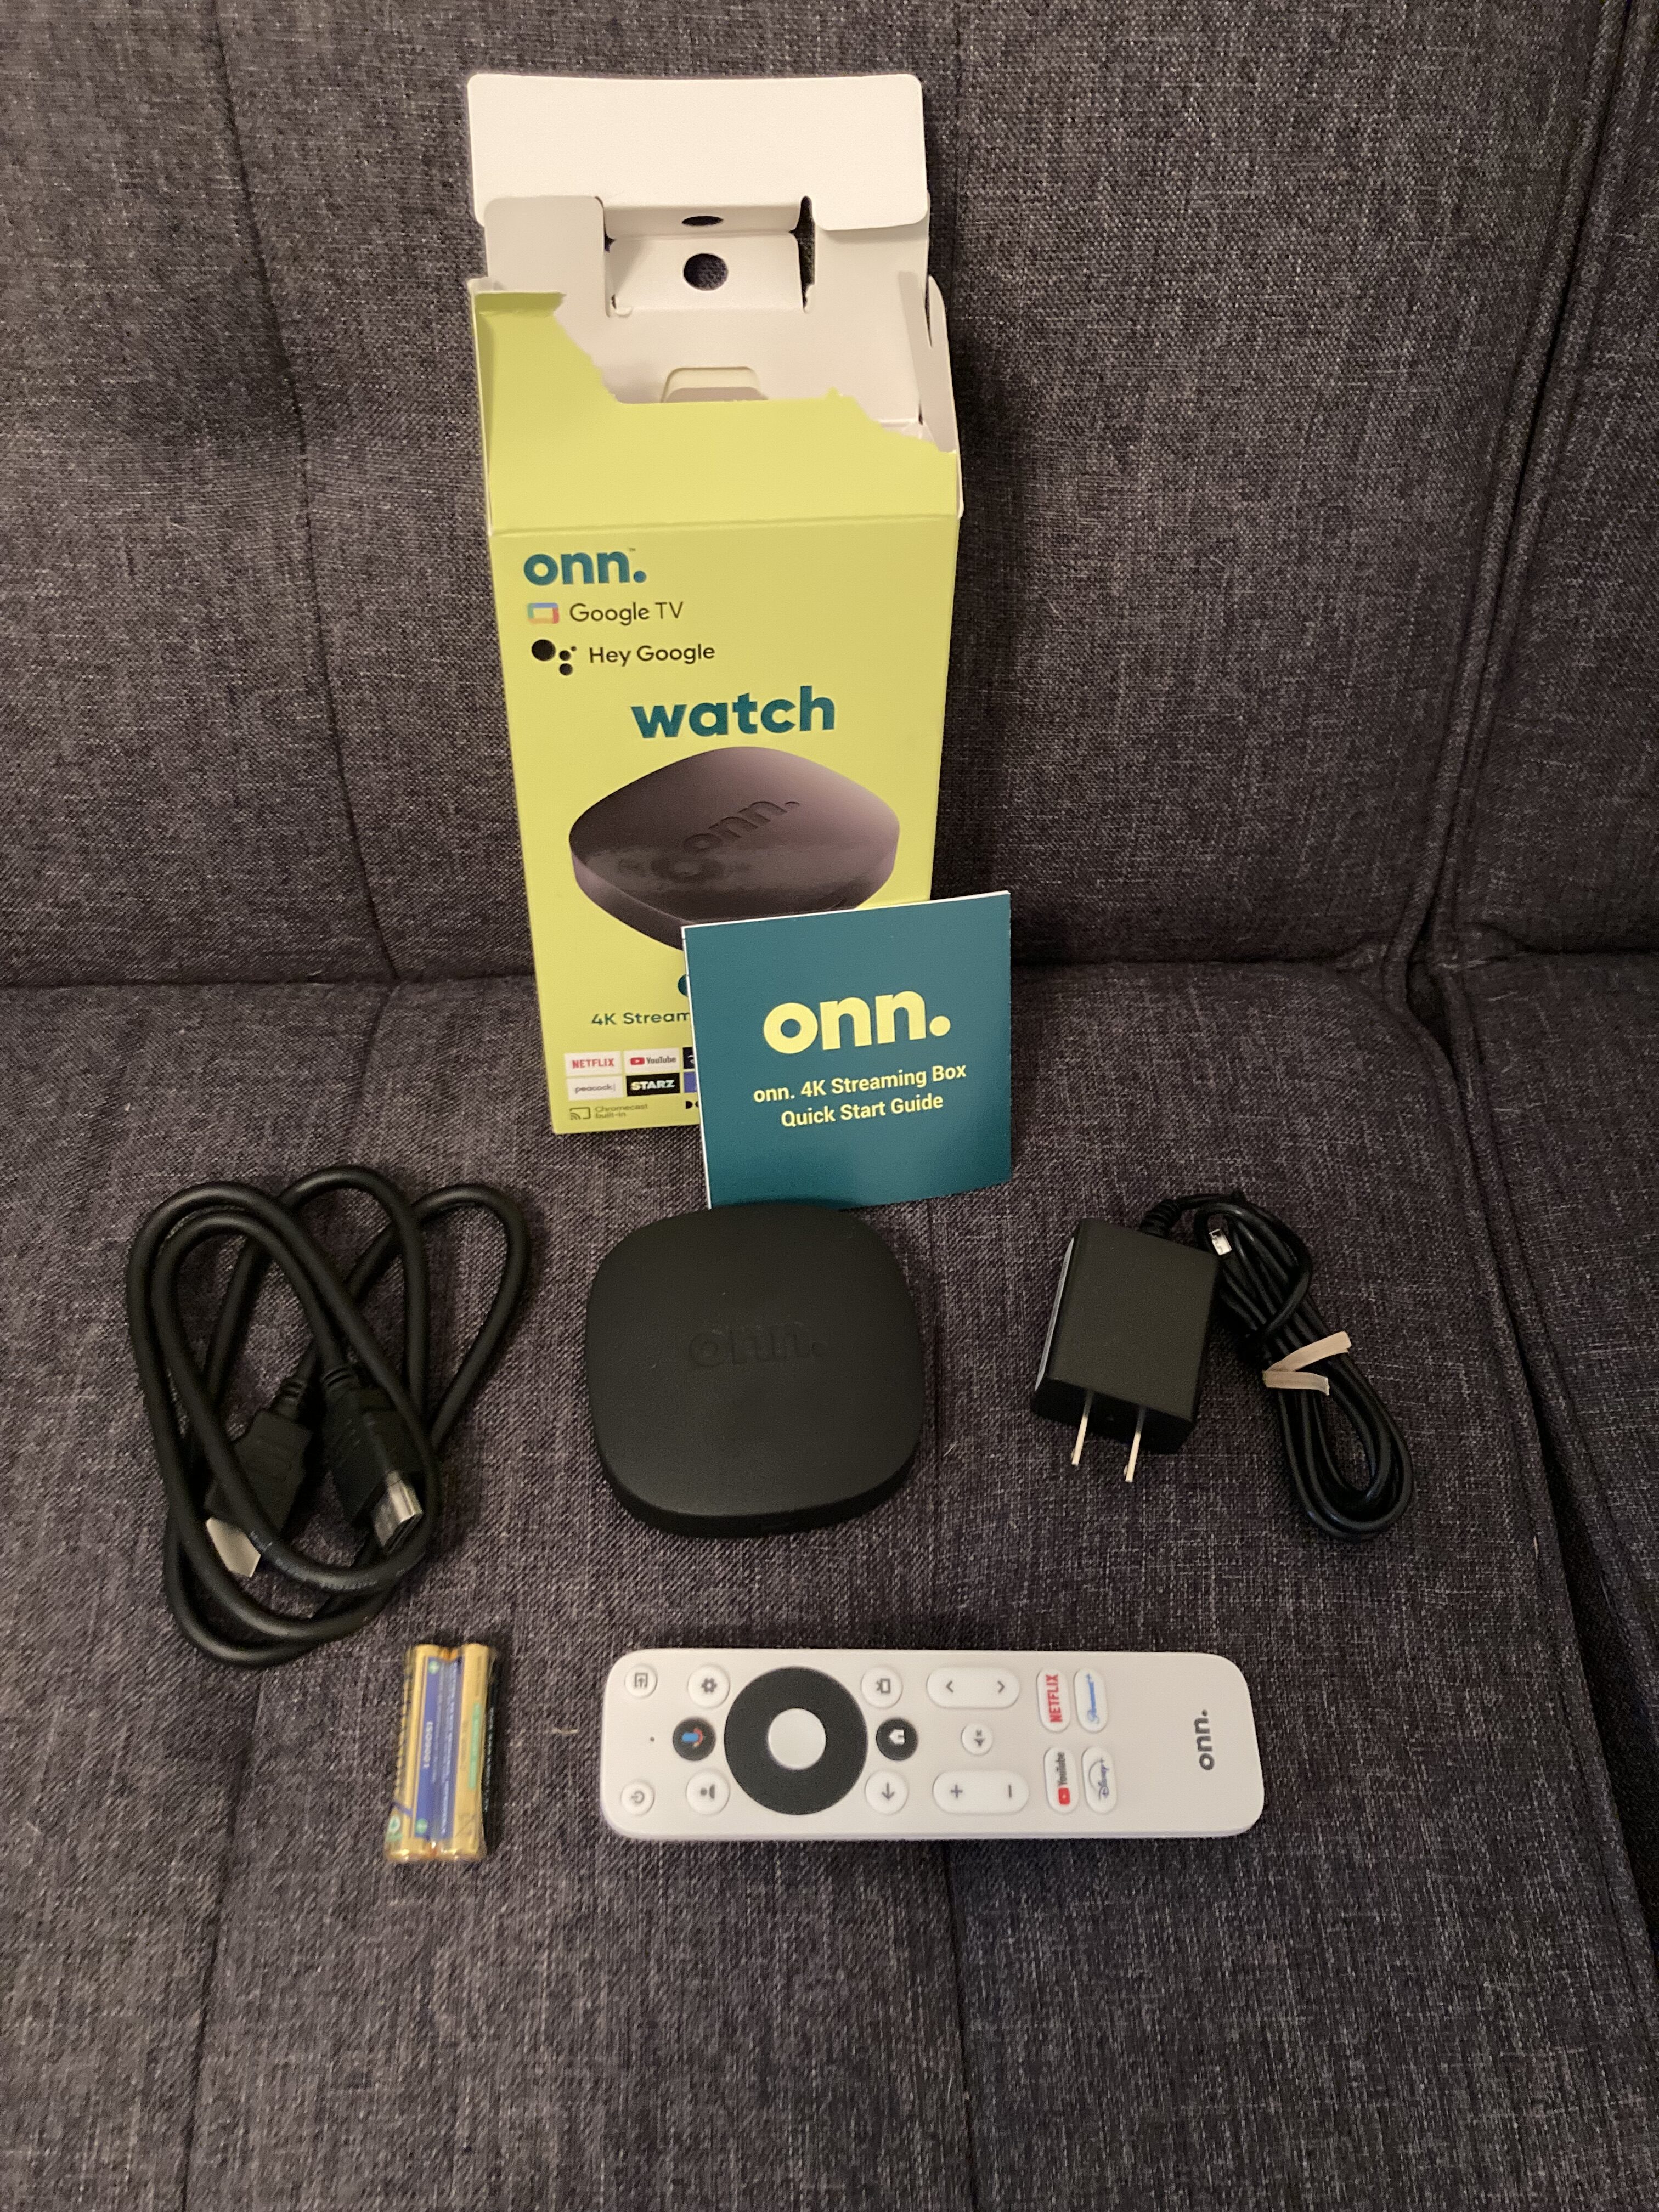 For the purpose of this review, our reviews team at Iptv Knowledge purchased a brand new Onn Google TV 4K Streaming Box